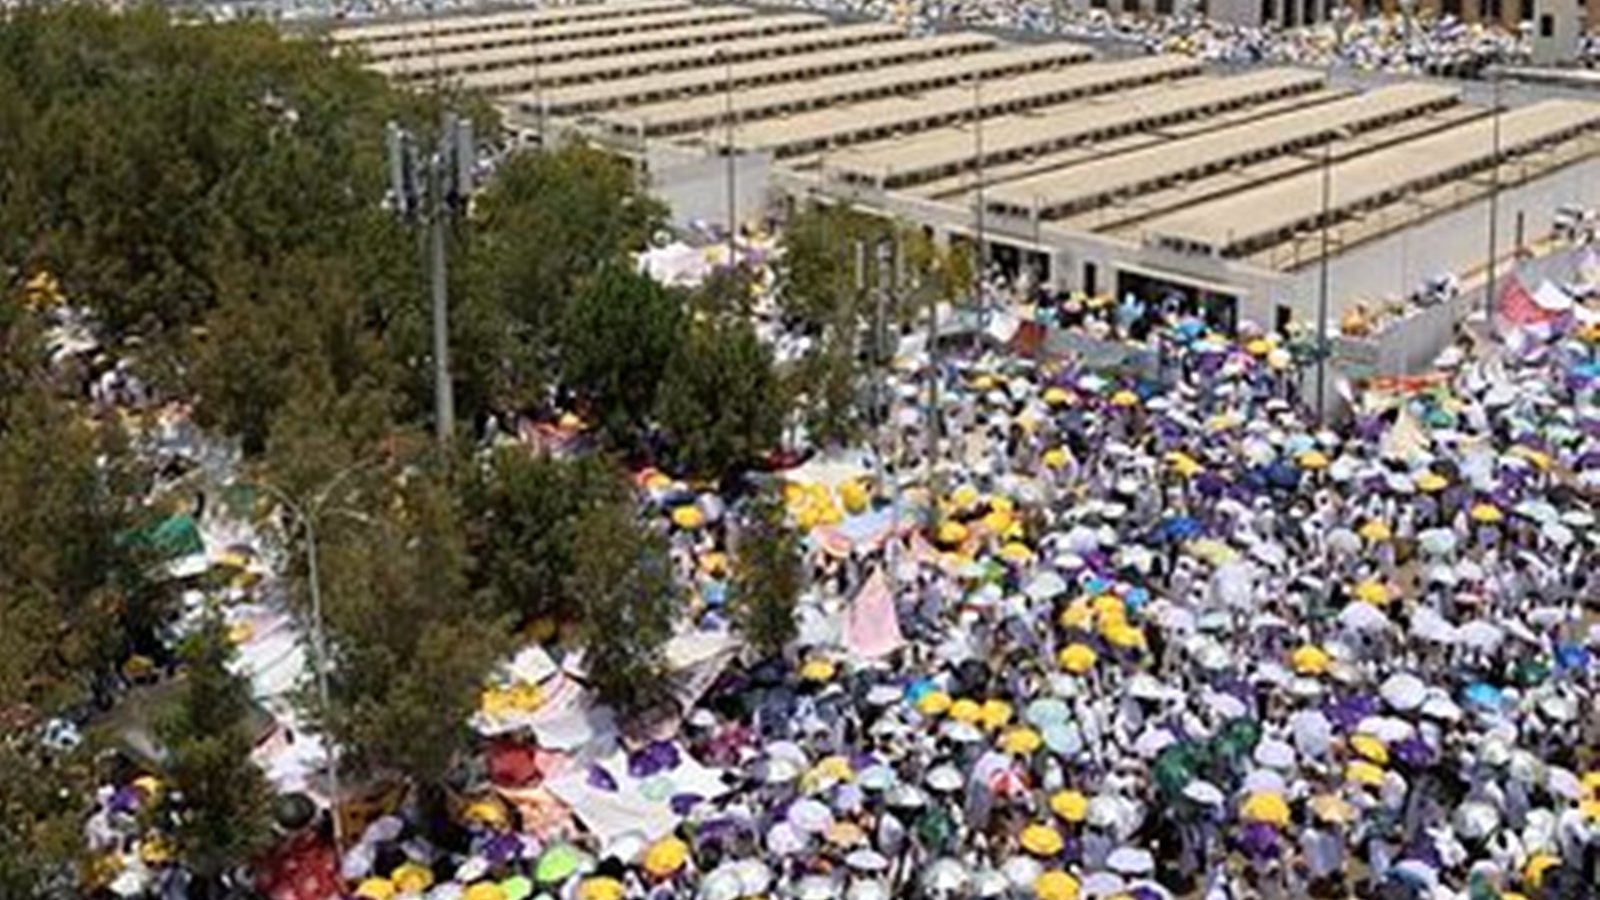 550 Lives Lost: The Challenging 2023 Hajj Amid Record-Breaking Heat